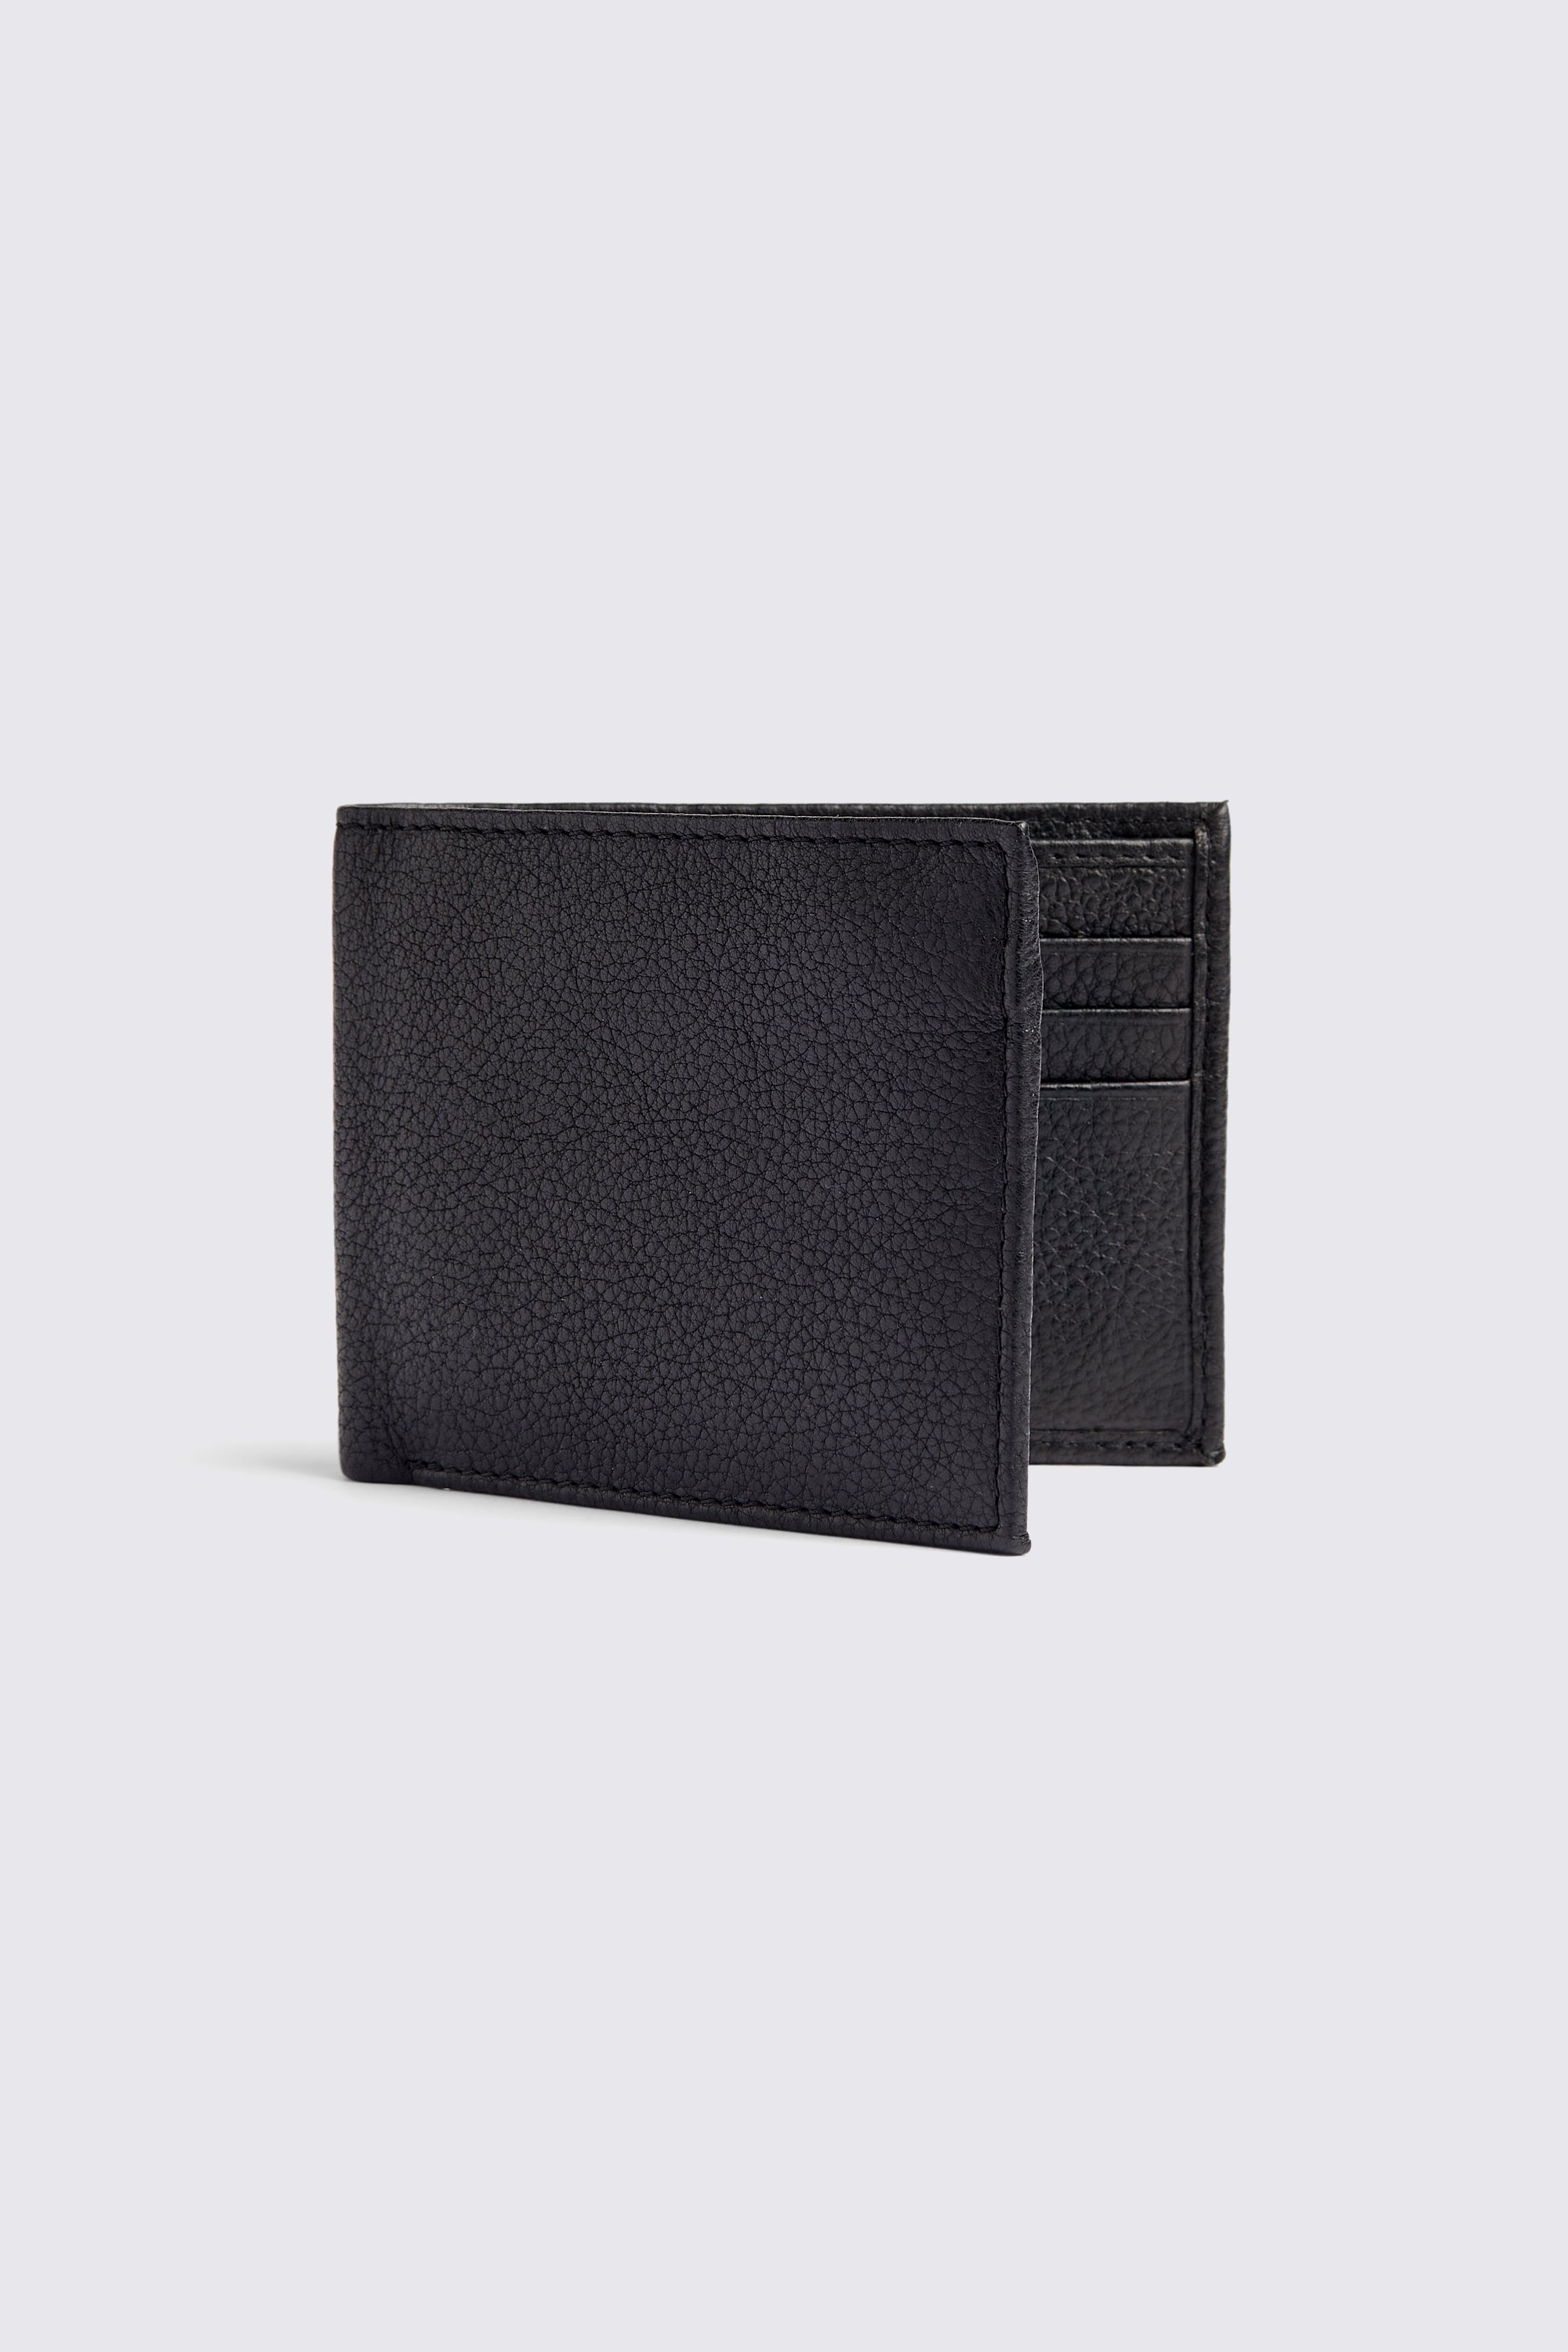 Black Grained Leather Wallet | Buy Online at Moss